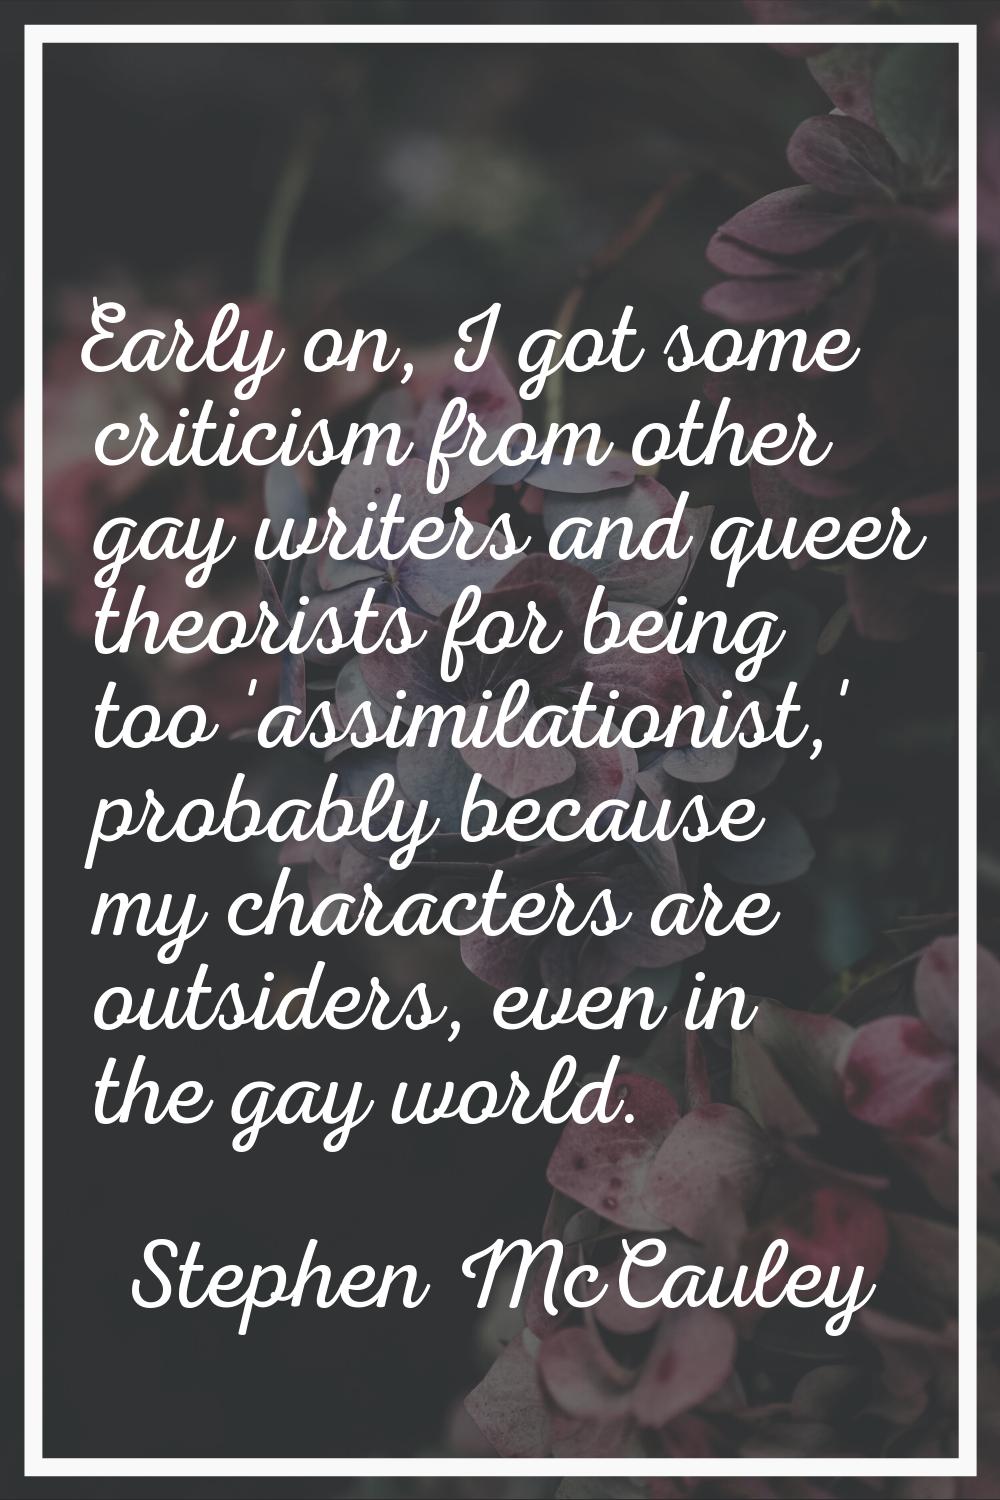 Early on, I got some criticism from other gay writers and queer theorists for being too 'assimilati